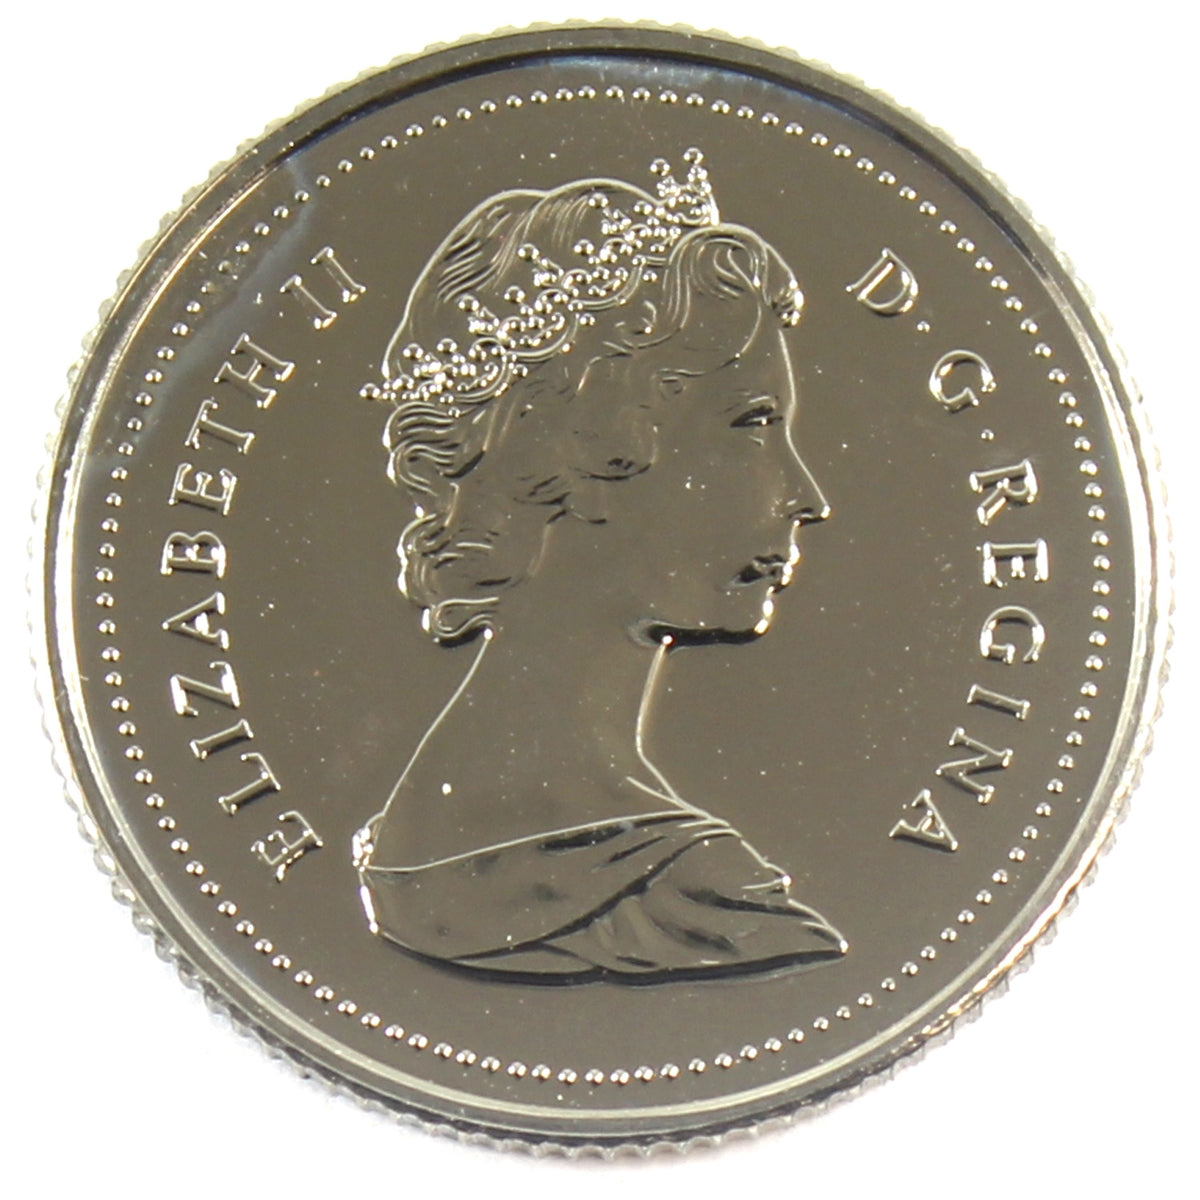 1984 Canada 10-cent Proof Like